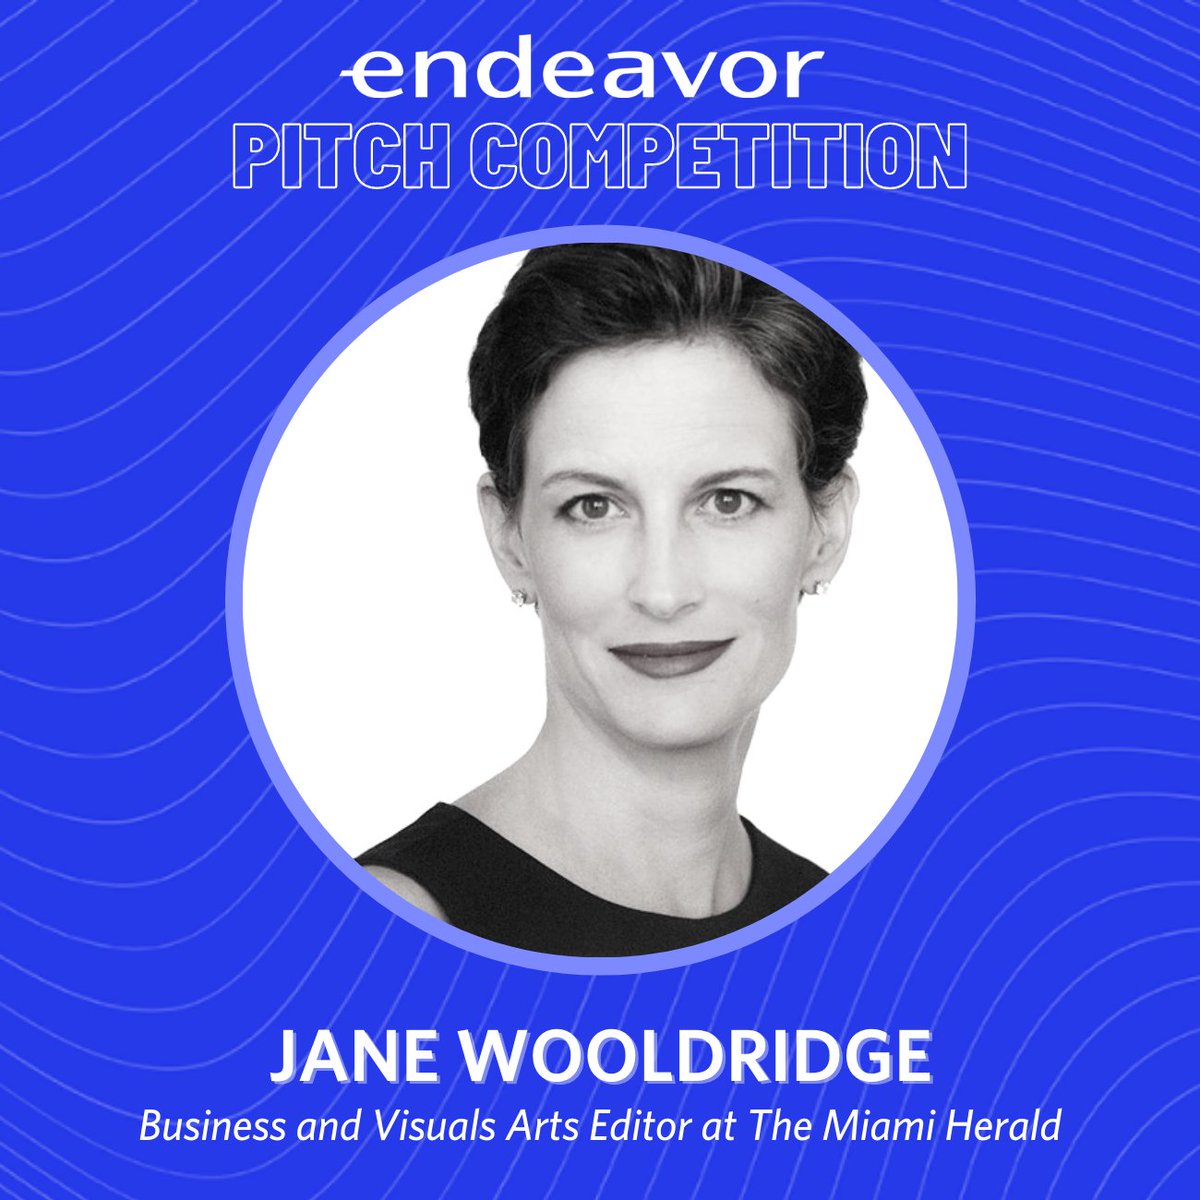 The third judge of the Endeavor Pitch Competition is @JaneWooldridge, Business and Visual Arts Editor of @MiamiHerald! She'll be joining us on June 30th to choose our winners! To join us, RSVP today on …deavorpitchcompetition.splashthat.com! 🚀